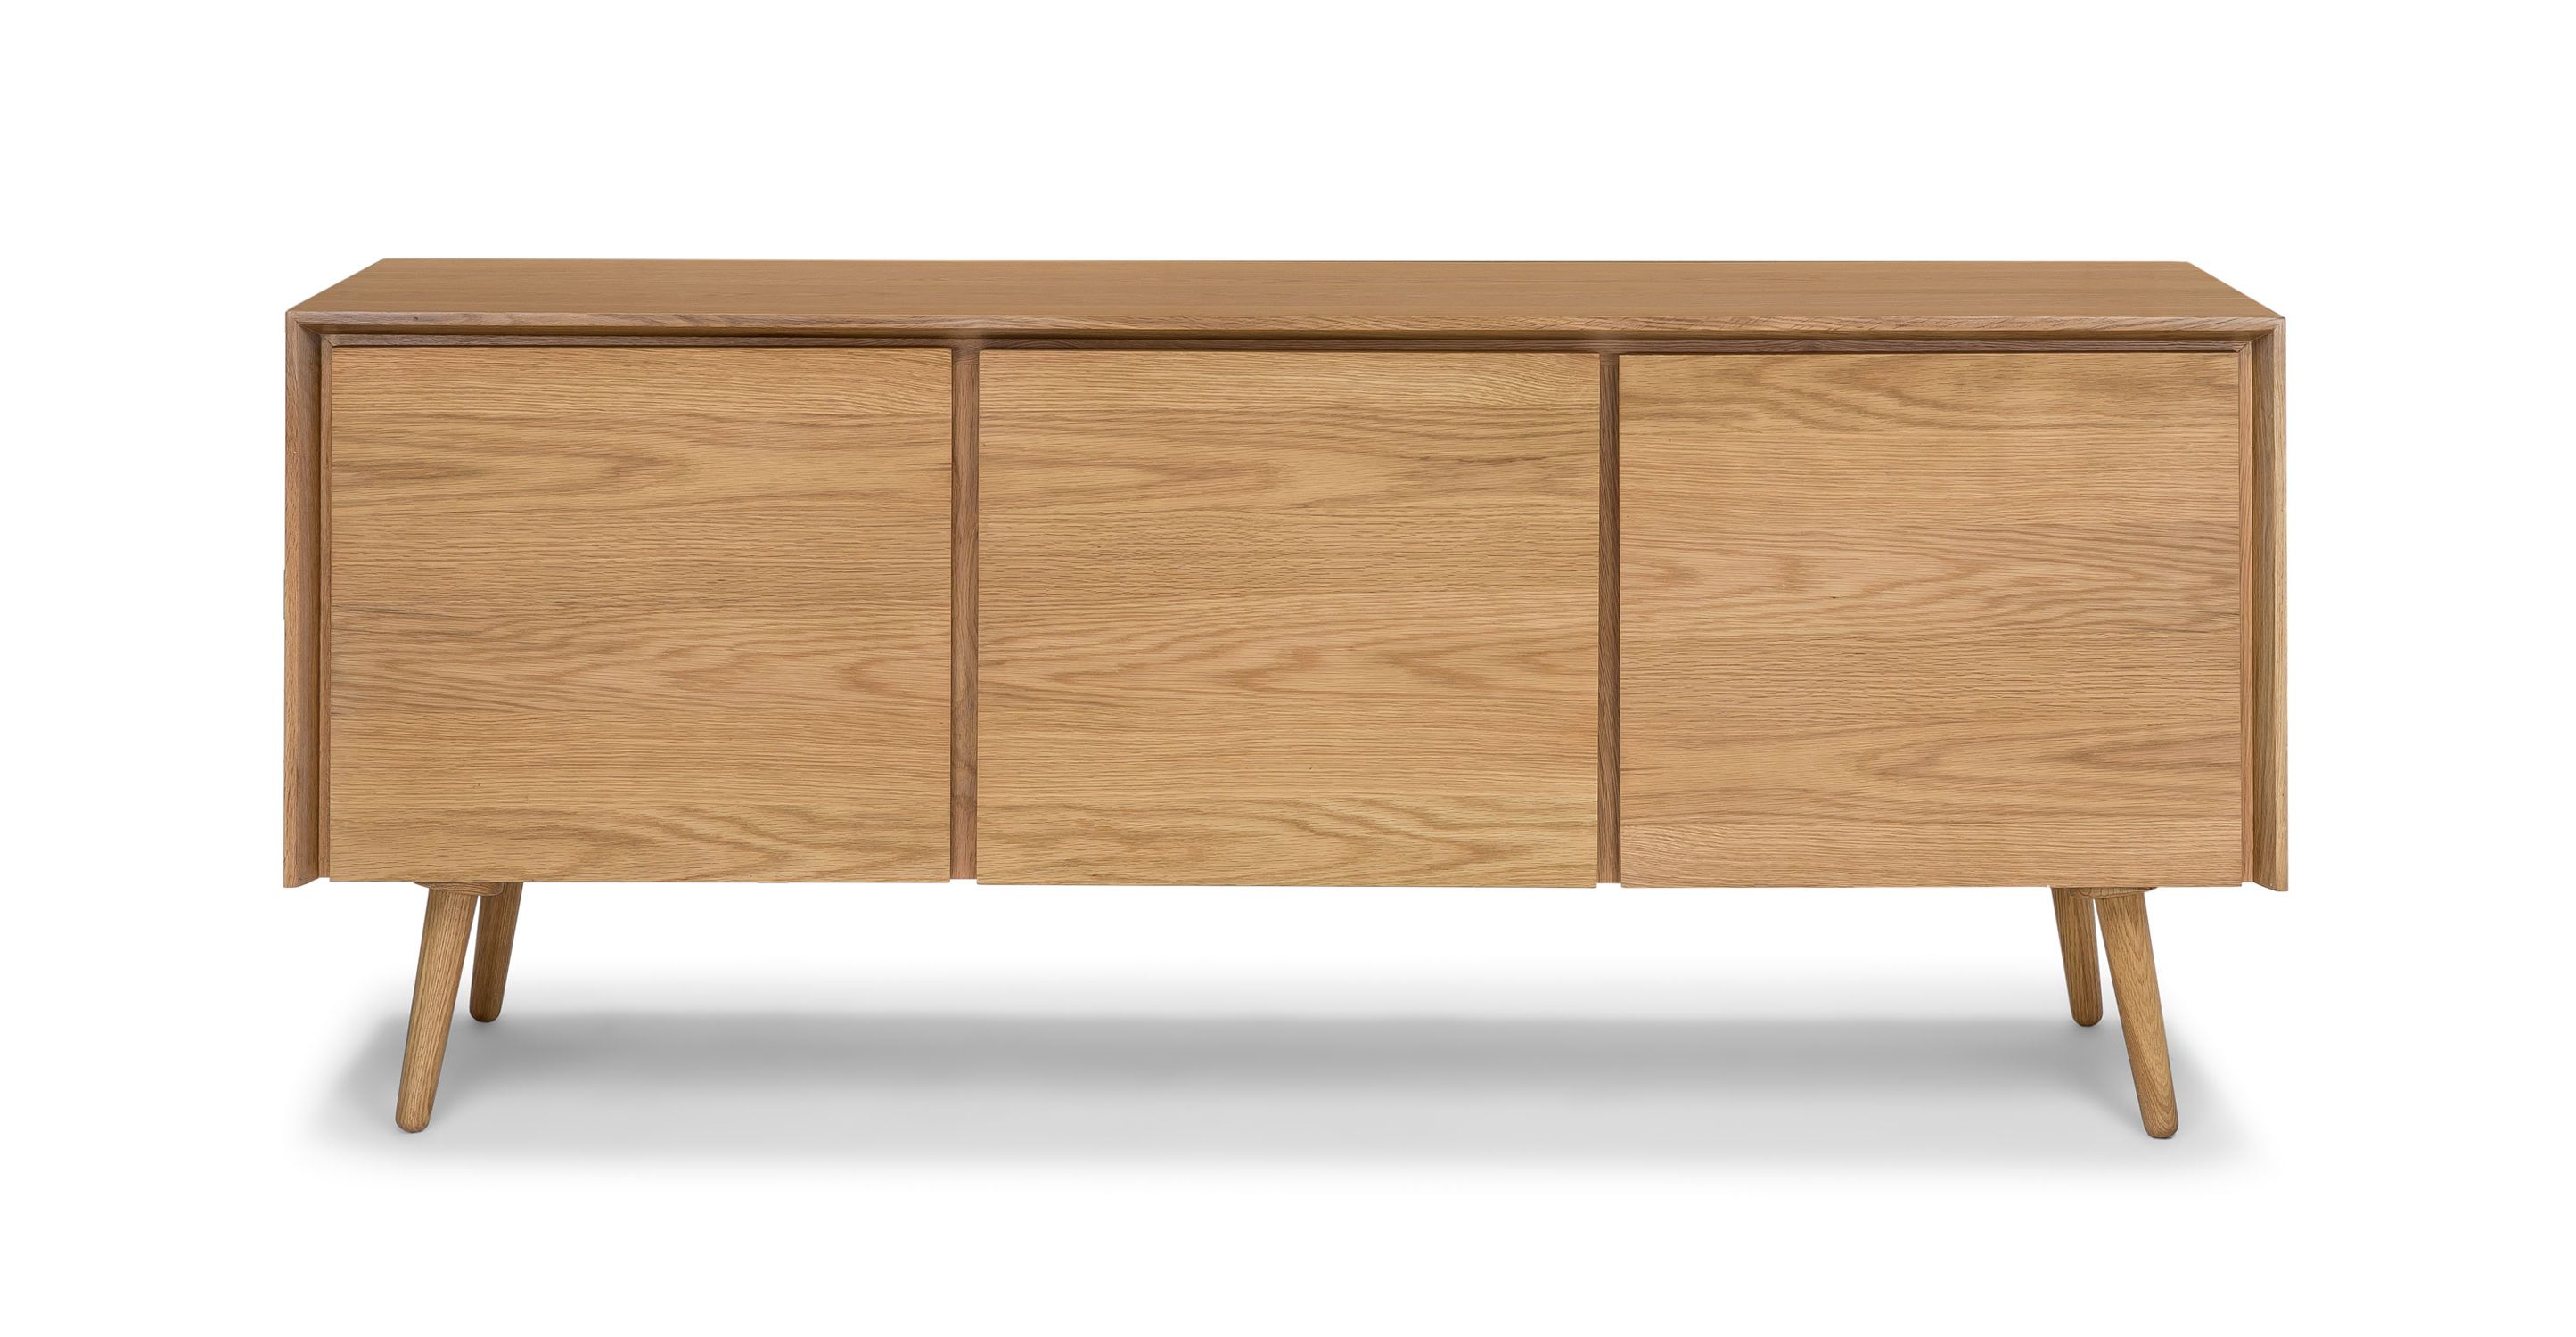 Seno 71" Oak Sideboard With Storage | Article For Transitional Oak Sideboards (View 6 of 20)